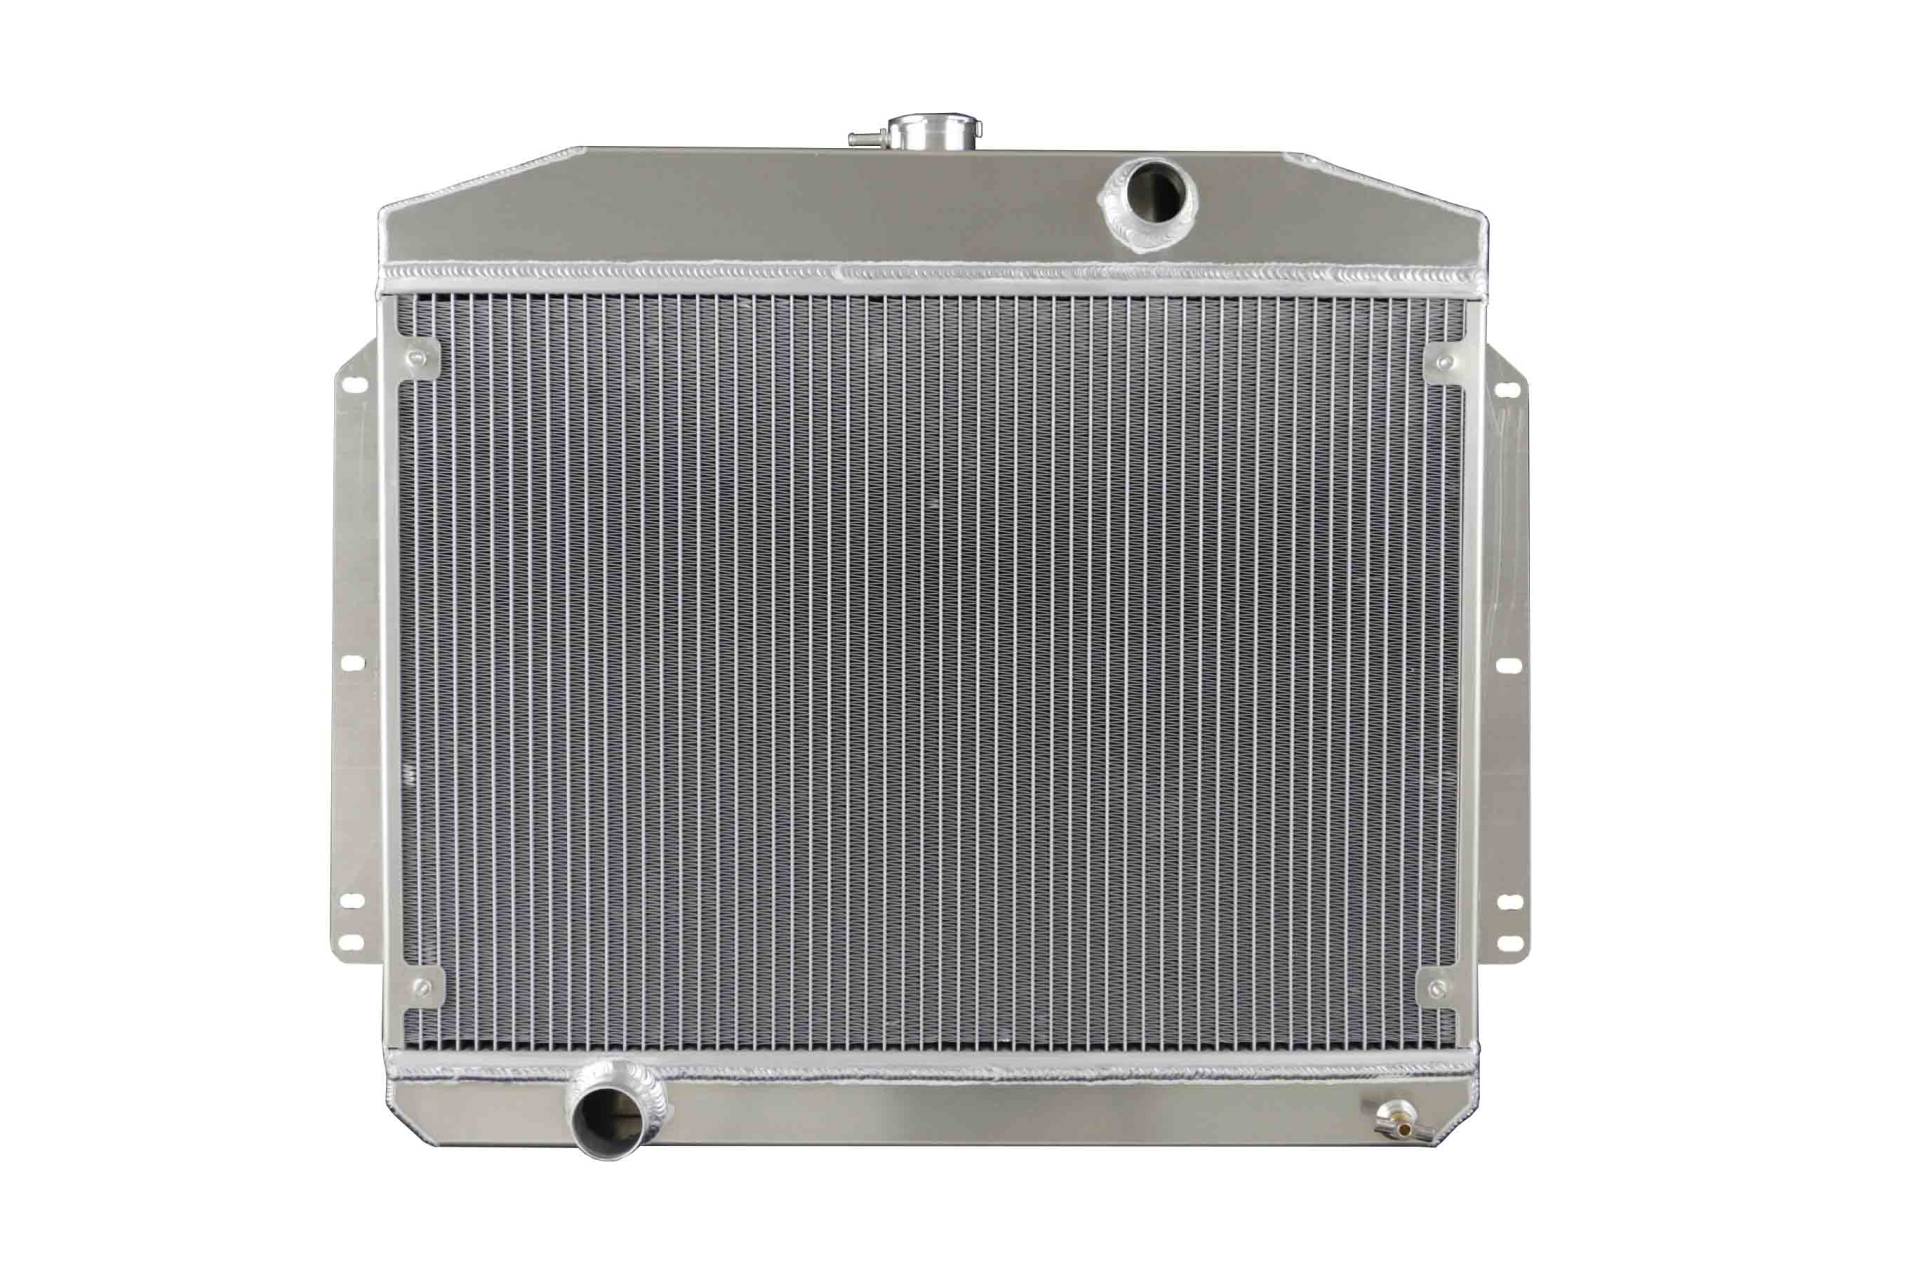 Wizard Cooling Inc - Wizard Cooling - 1949-1951 Mercury (Ford V8) Aluminum Radiator - 40005-200